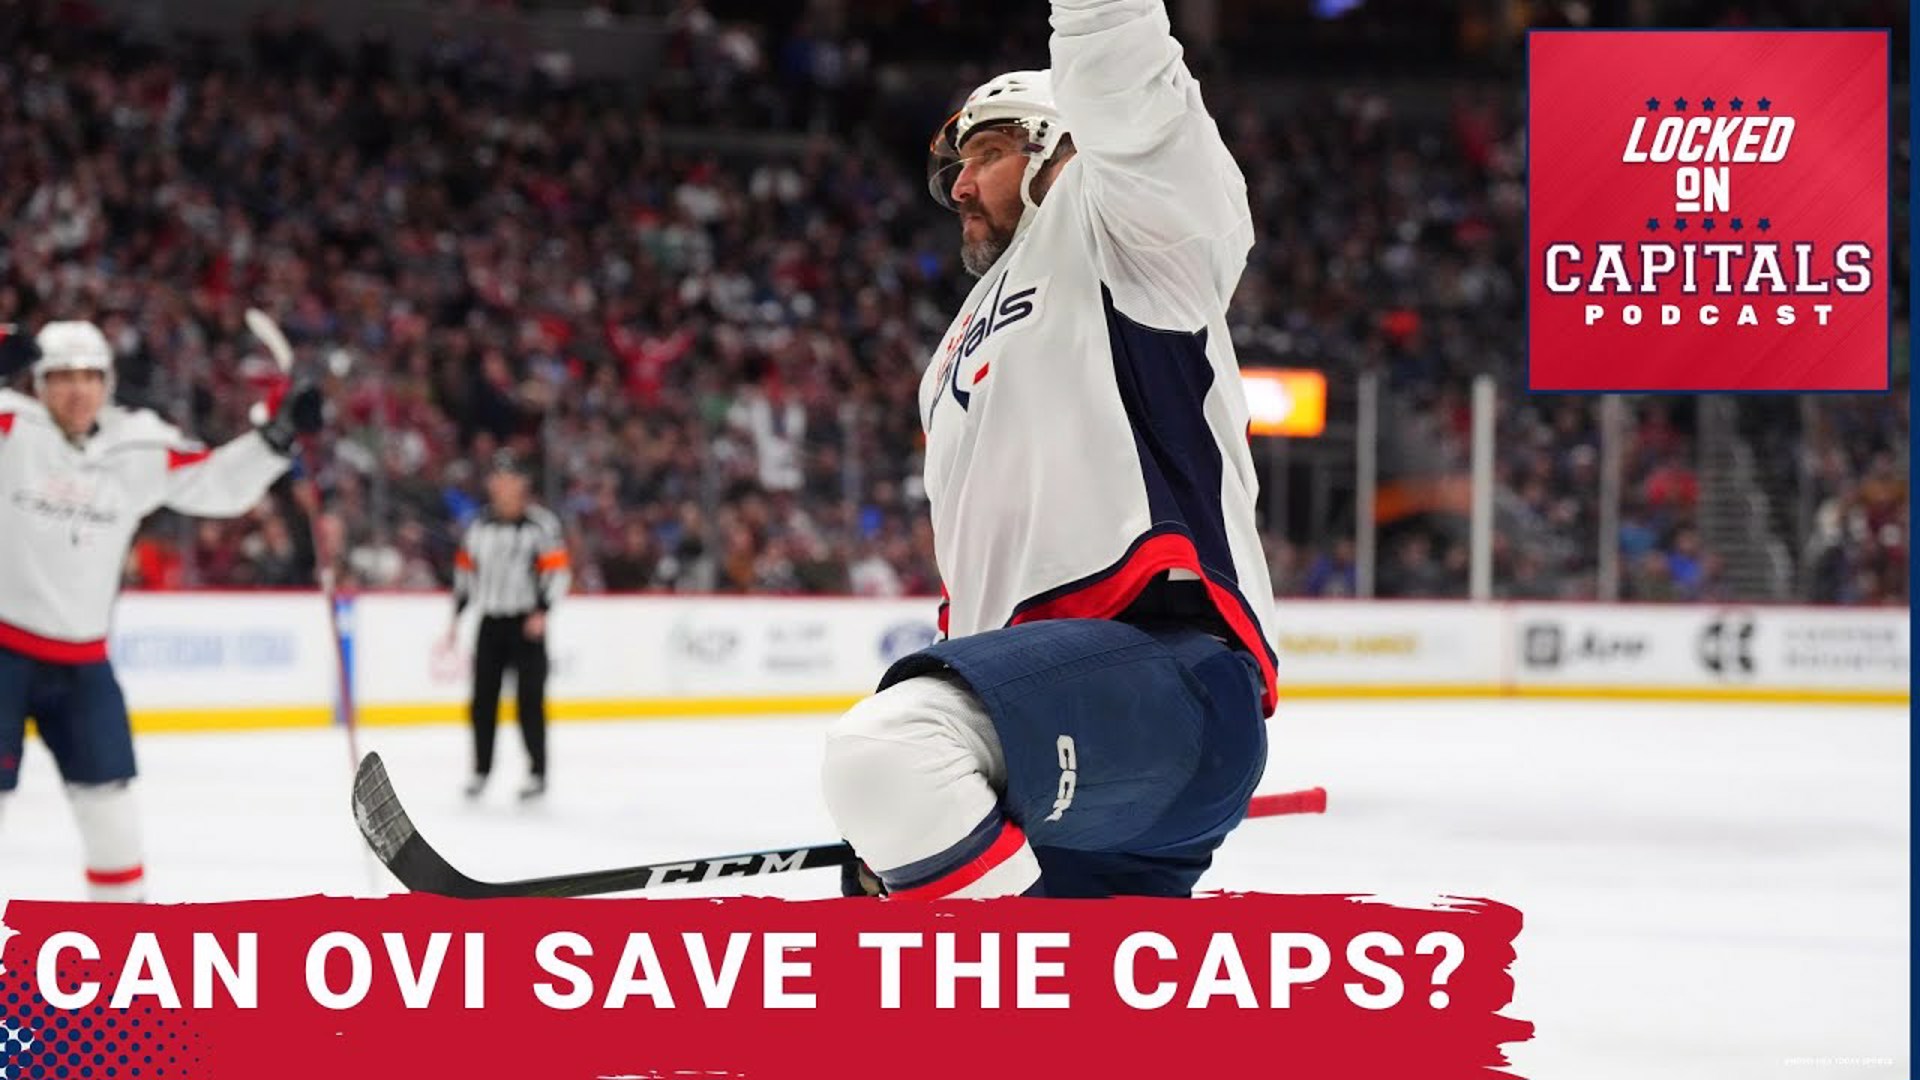 In this edition of Locked on Capitals Dan talks about the Capitals loss to the Detroit Red Wings.